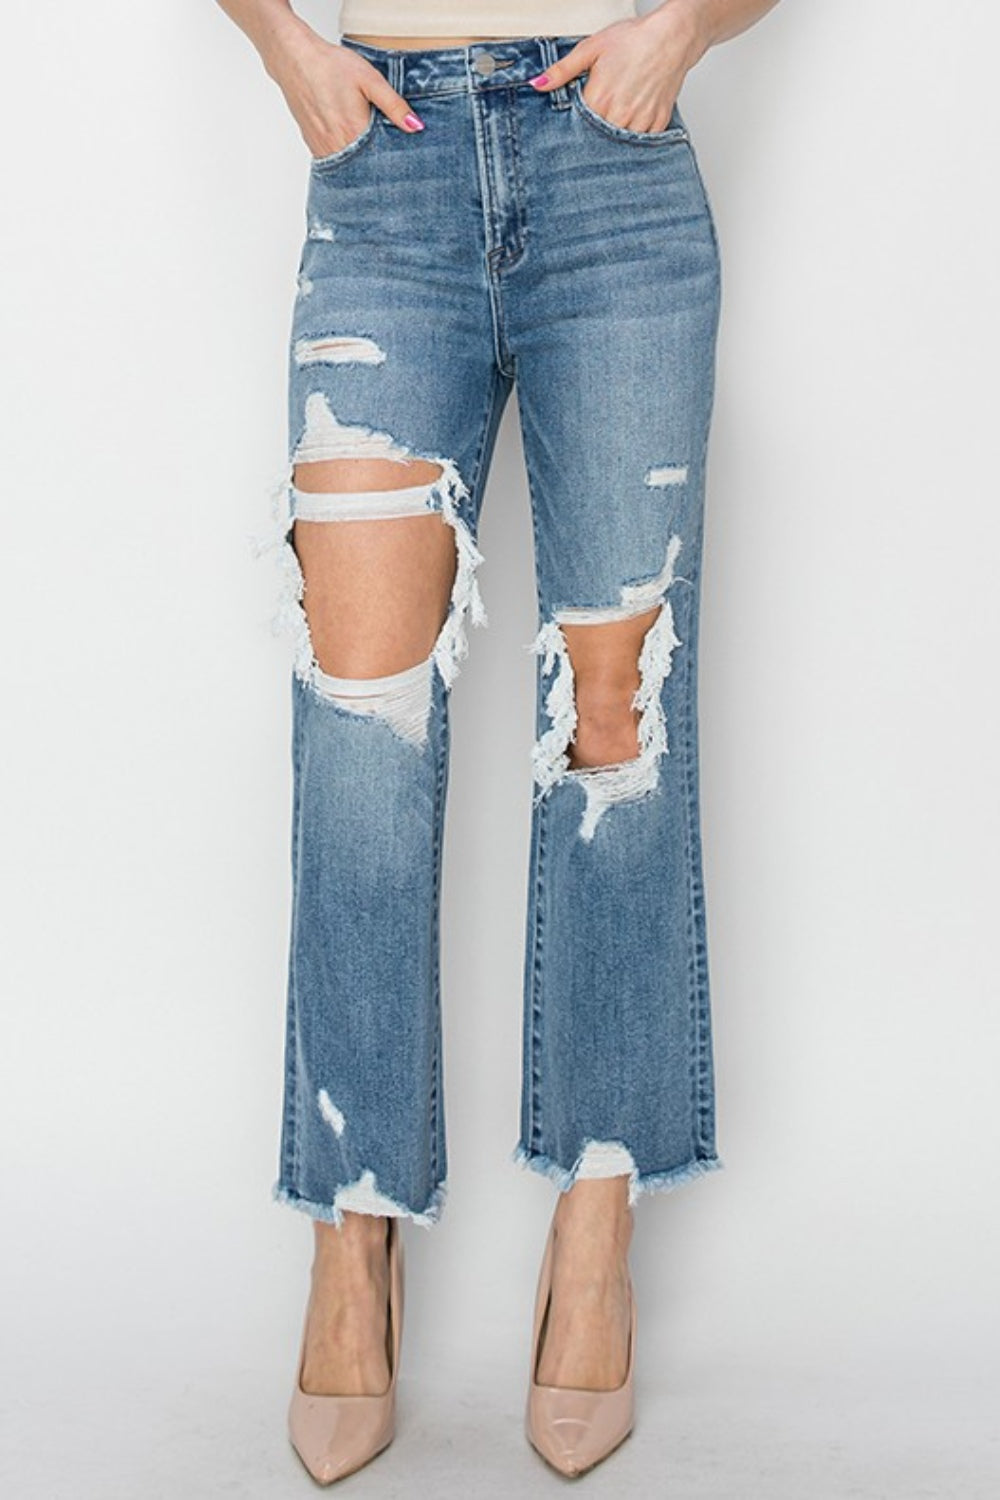 RISEN - High Waist Ripped Jeans - Inspired Eye Boutique